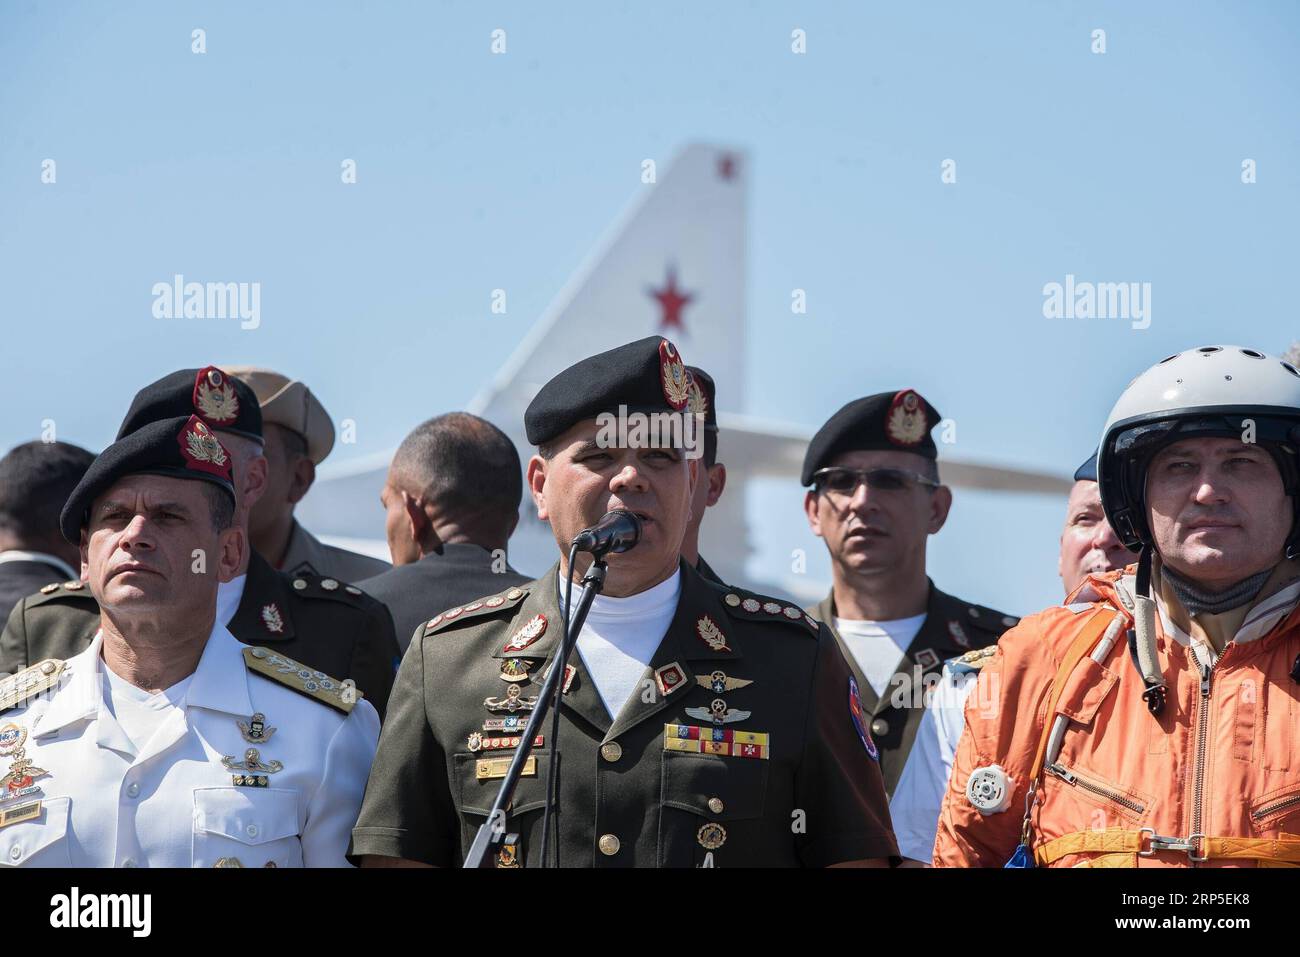 (181212) -- VARGAS, Dec. 12, 2018 -- Venezuelan Defense Minister Vladimir Padrino Lopez delivers a speech during the reception ceremony for the Russian Armed Forces at the Simon Bolivar International Airport, in Maiquetia, Vargas State, Venezuela, Dec. 10, 2018. Two Russian Tupolev Tu-160 strategic bombers have arrived in Venezuela, the Russian defense ministry said in a statement. According to Russian news report, Venezuelan Defense Minister Vladimir Padrino Lopez welcomed the Russian warplanes, saying that Venezuela is getting prepared to defend itself when needed and the country will do it Stock Photo